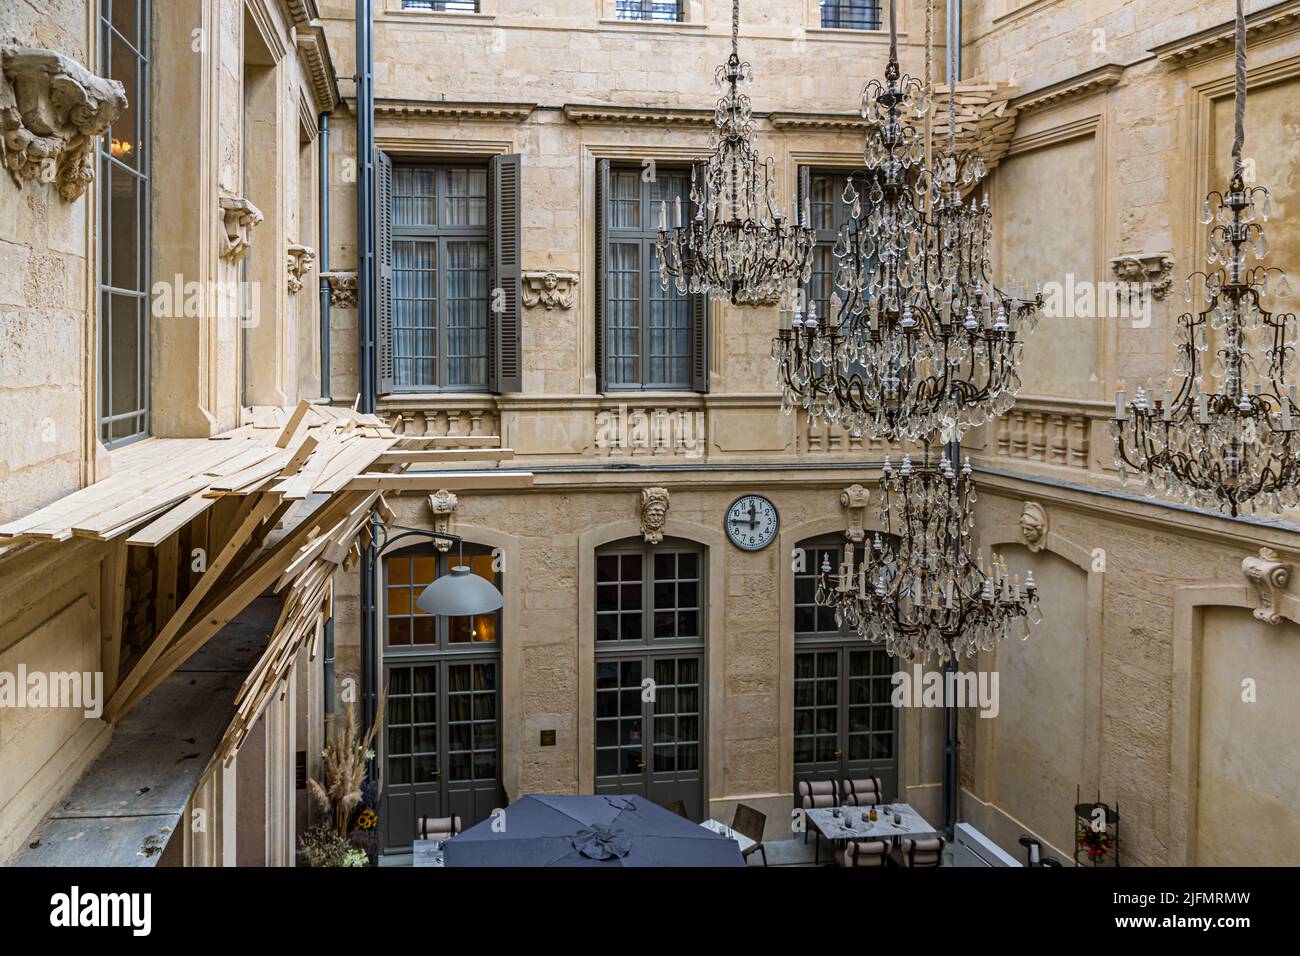 In the courtyard of the Hotel Richer de Belleval, Japanese artist Tadashi Kawamata displays 'Birds' Nests' made of wooden slats. Montpellier, France Stock Photo